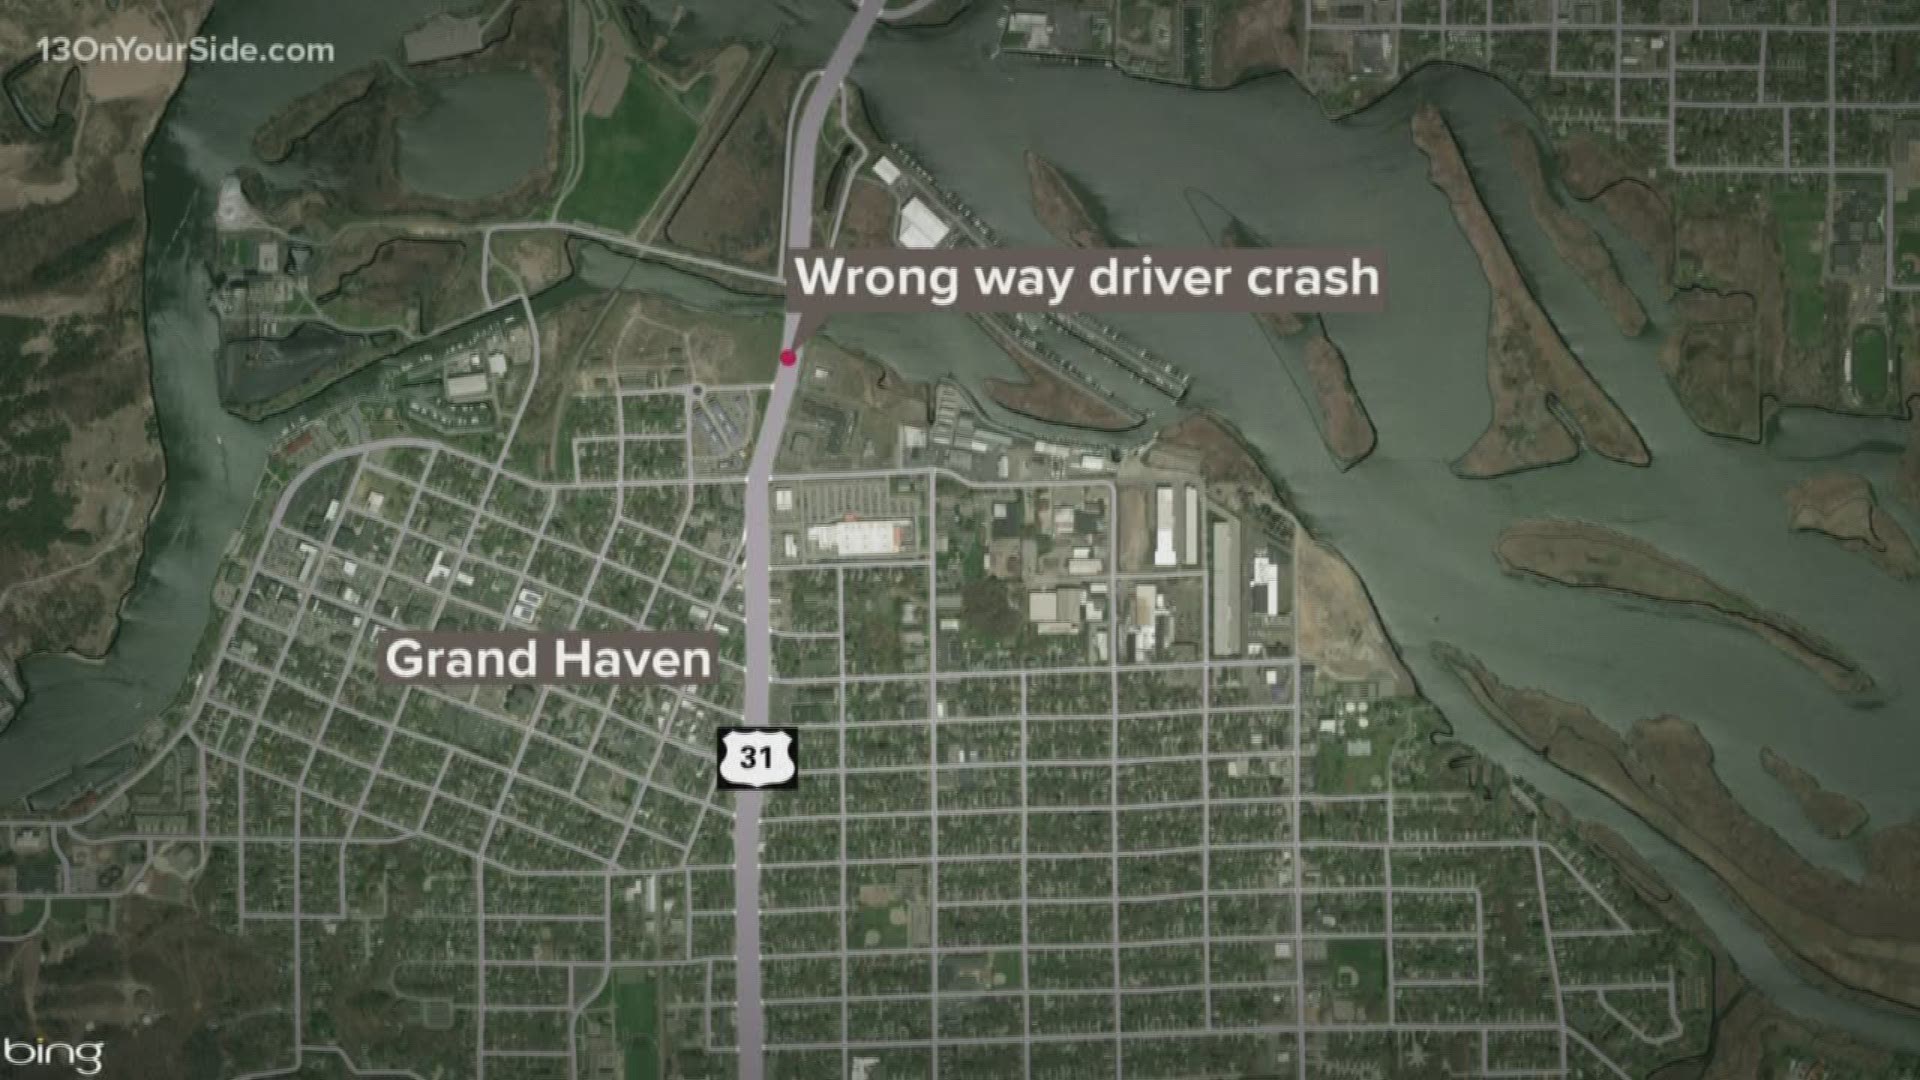 A wrong-way driver is in jail after leading authorities on a car chase on the highway in Grand Haven early Thursday morning.